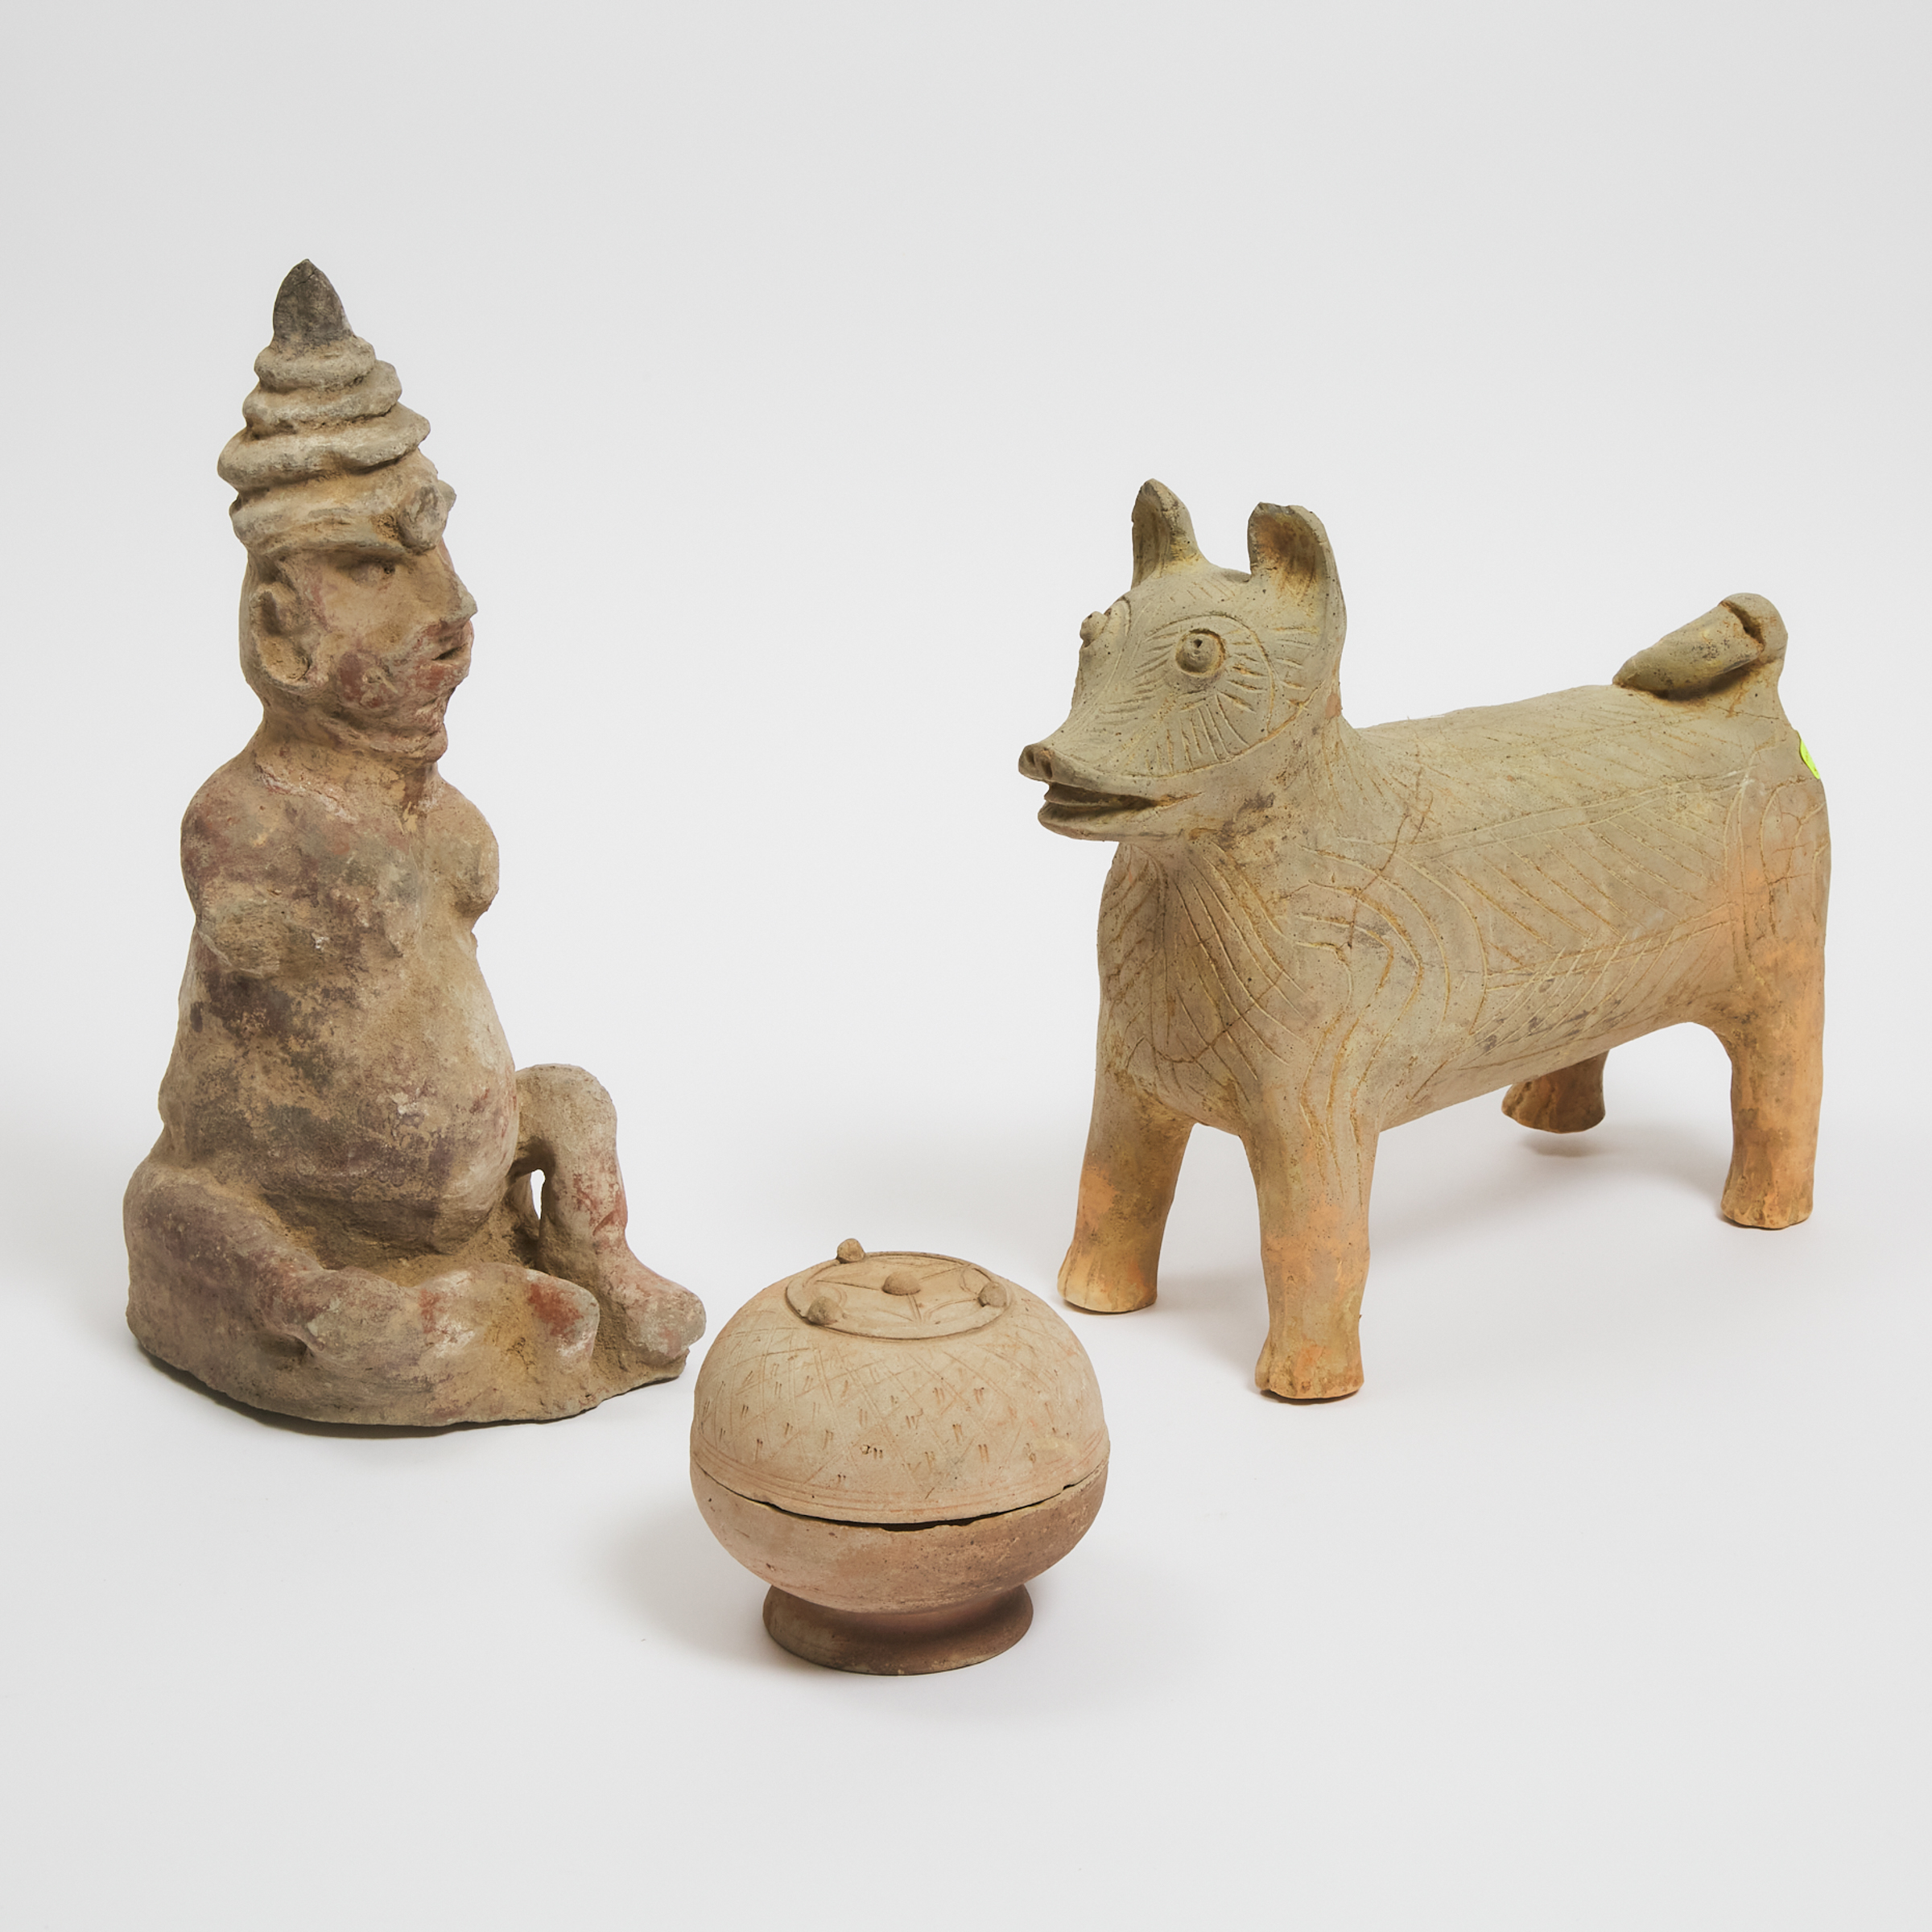 A Group of Three Pottery Figures and Vessel, Han Dynasty (206 BC-220 AD)